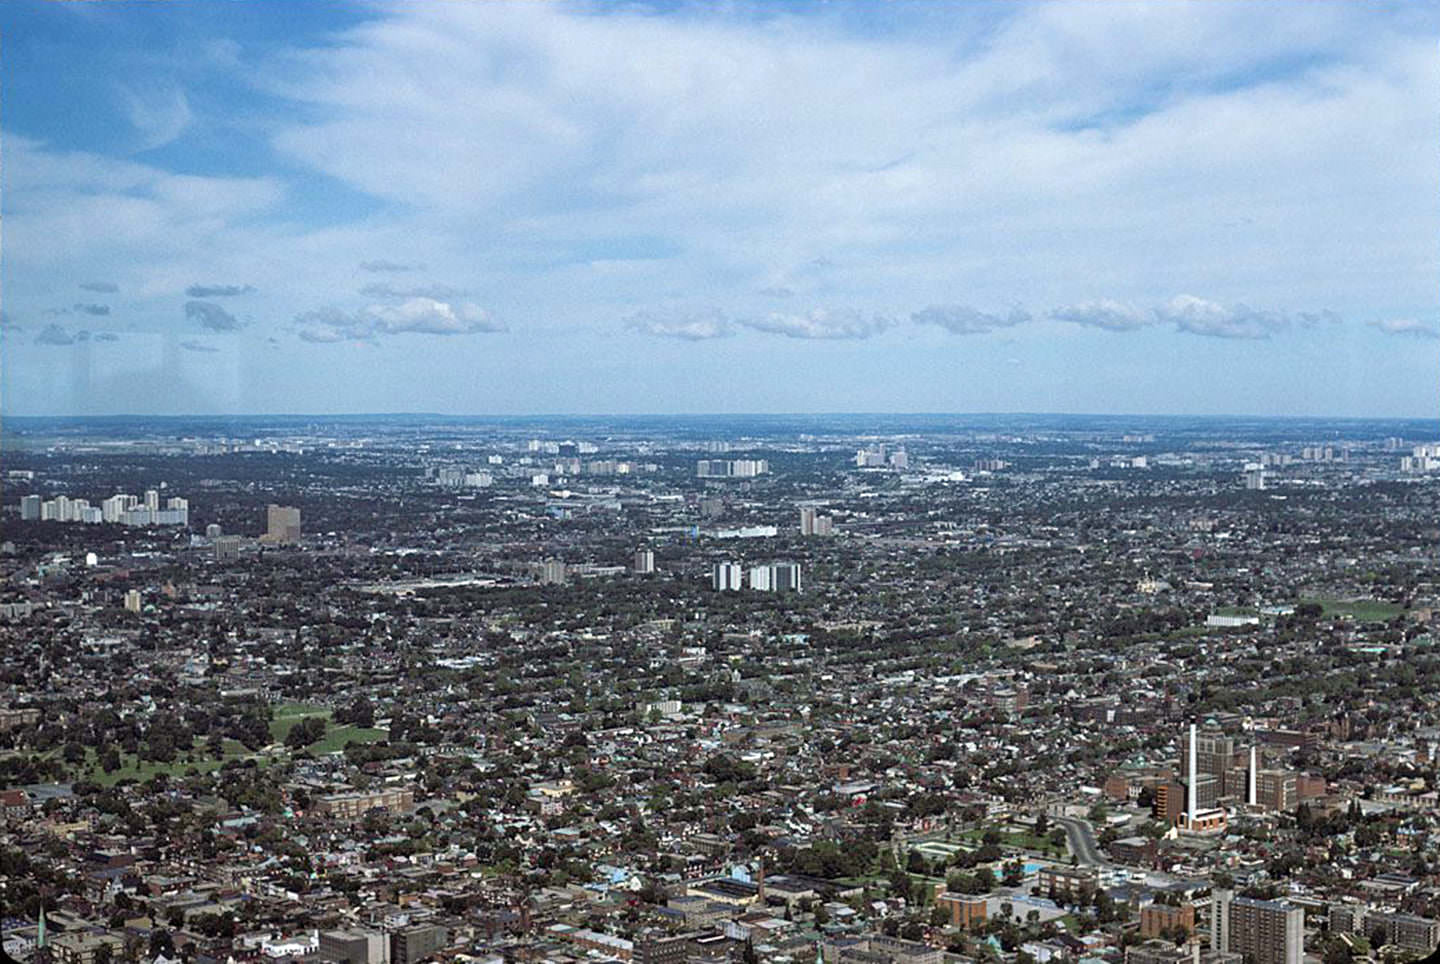 Toronto, view looking northwest from the C.N. Tower, Aug. 1976.